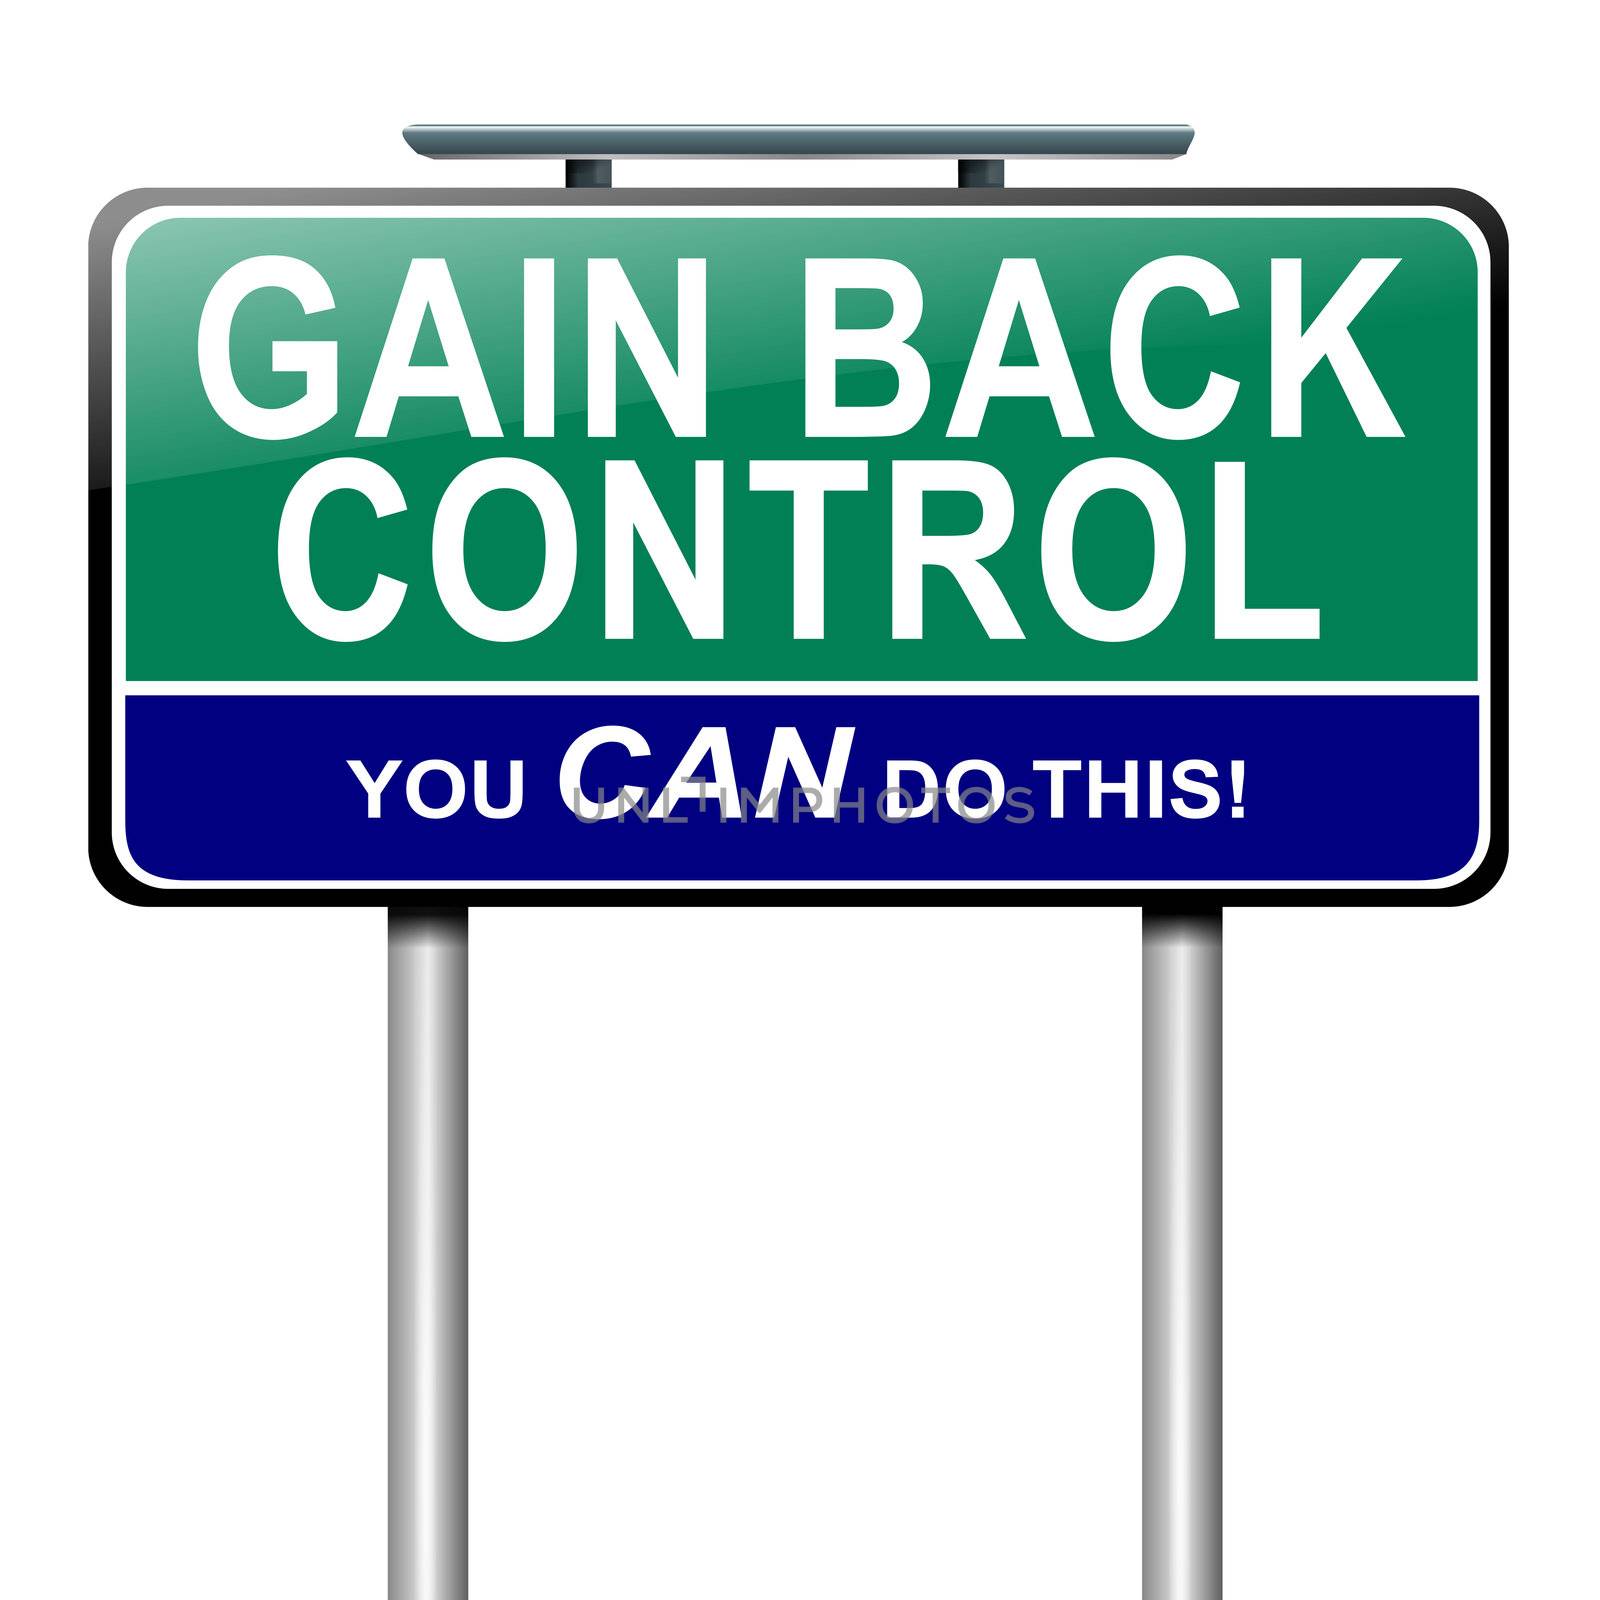 Illustration depicting a roadsign with a control concept. White background.